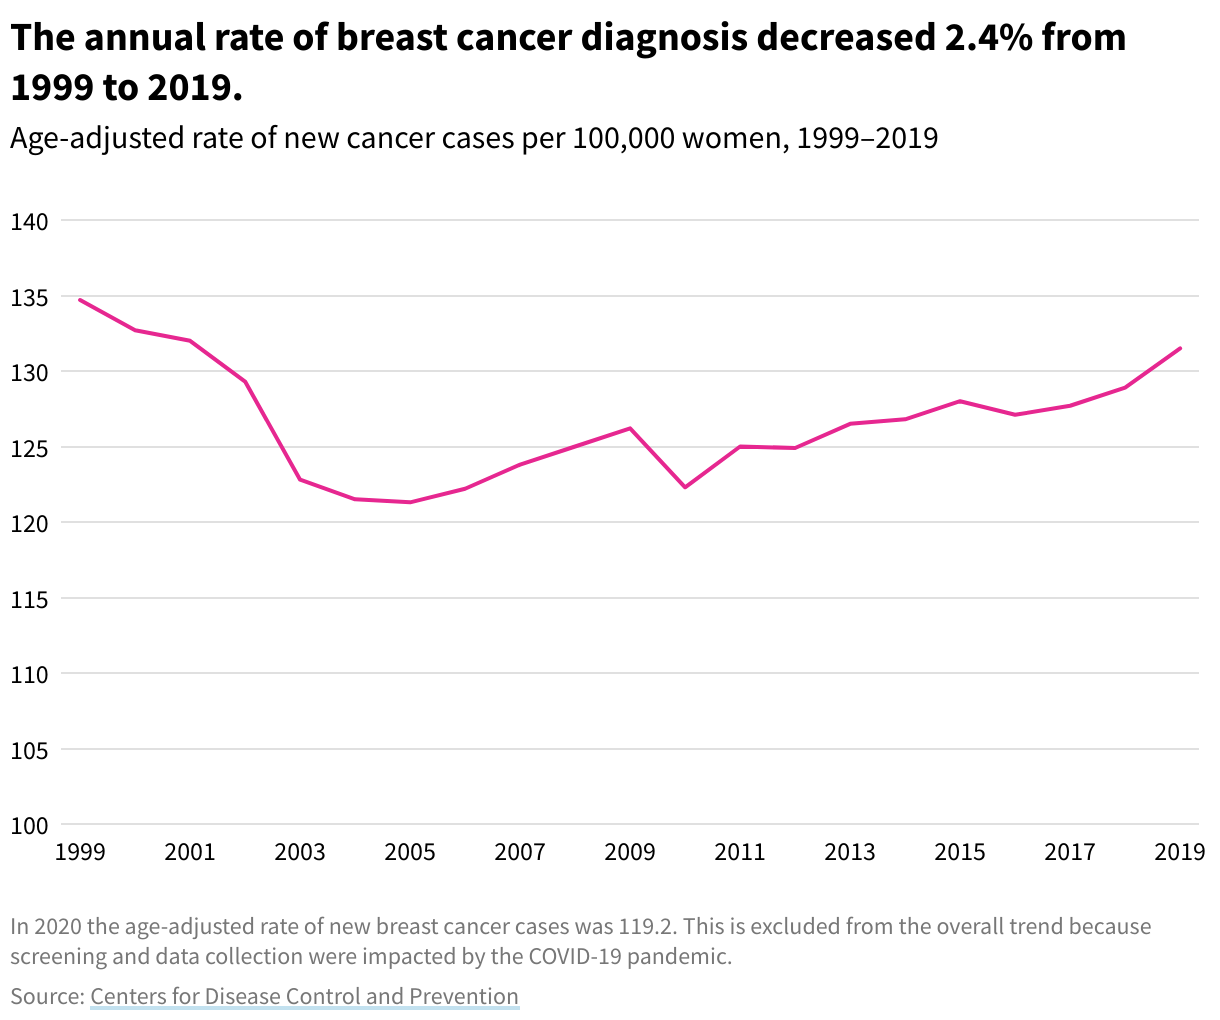 Line chart showing the annual rate of breast cancer diagnosis from 1999 to 2019. In 2019, the rate of breast cancer diagnosis was 131.5 per 100,000 women